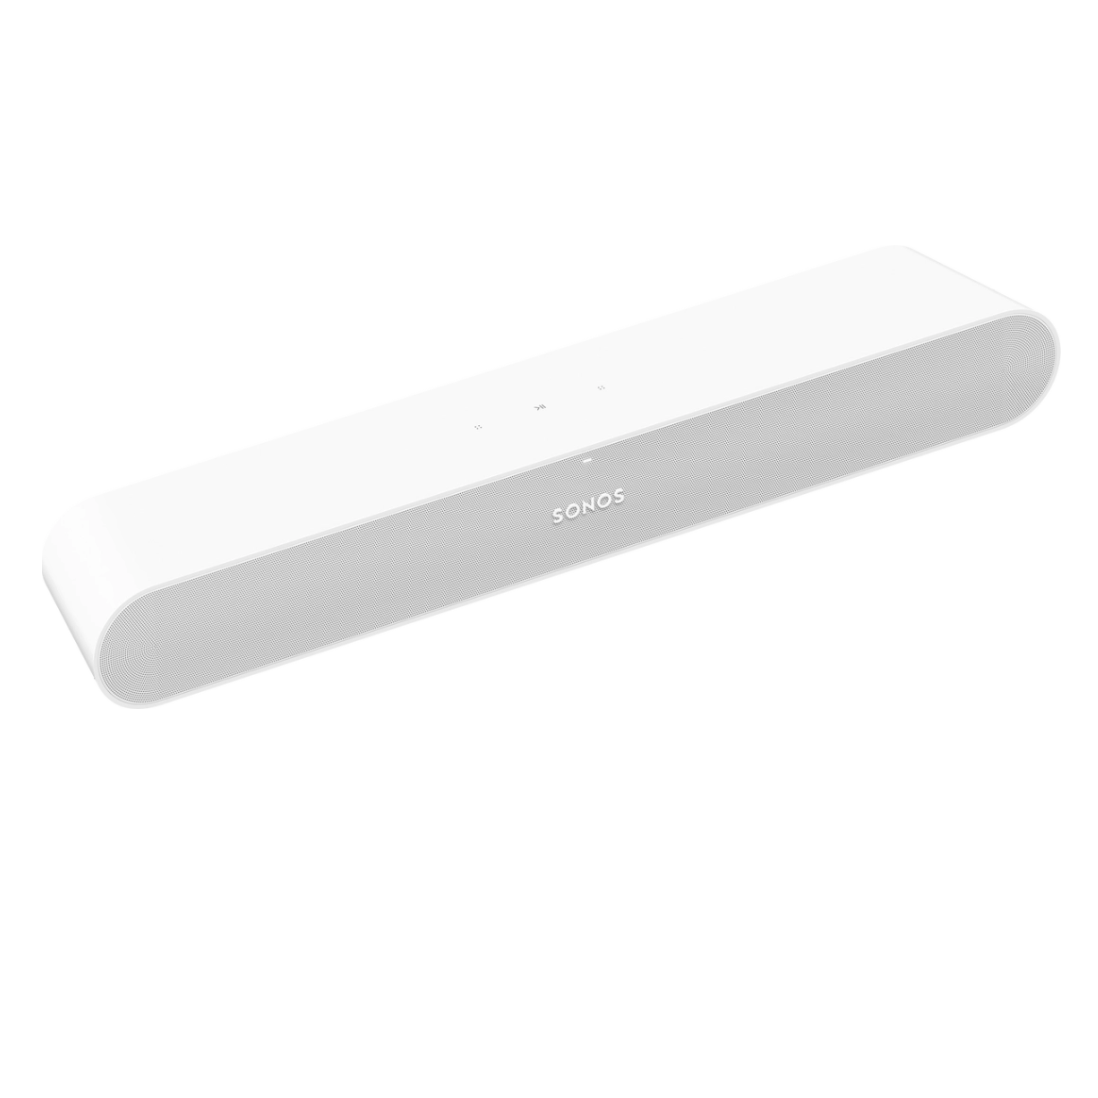 Sonos may launch streaming box to rival Roku and Apple TV, along with its headphones